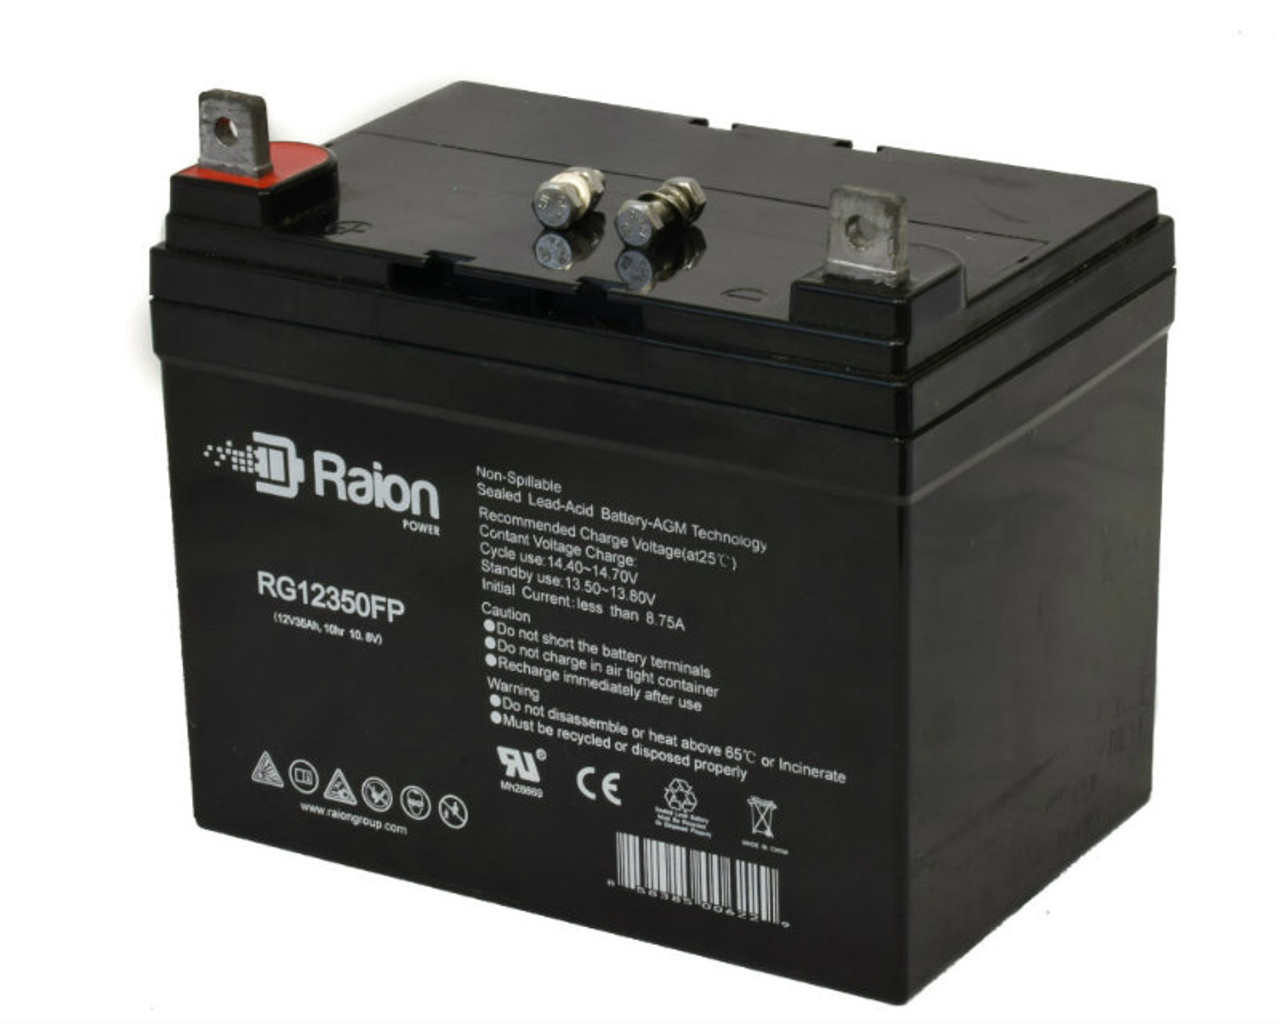 Raion Power Replacement 12V 35Ah RG12350FP Battery for Ihc Cub Garden 282